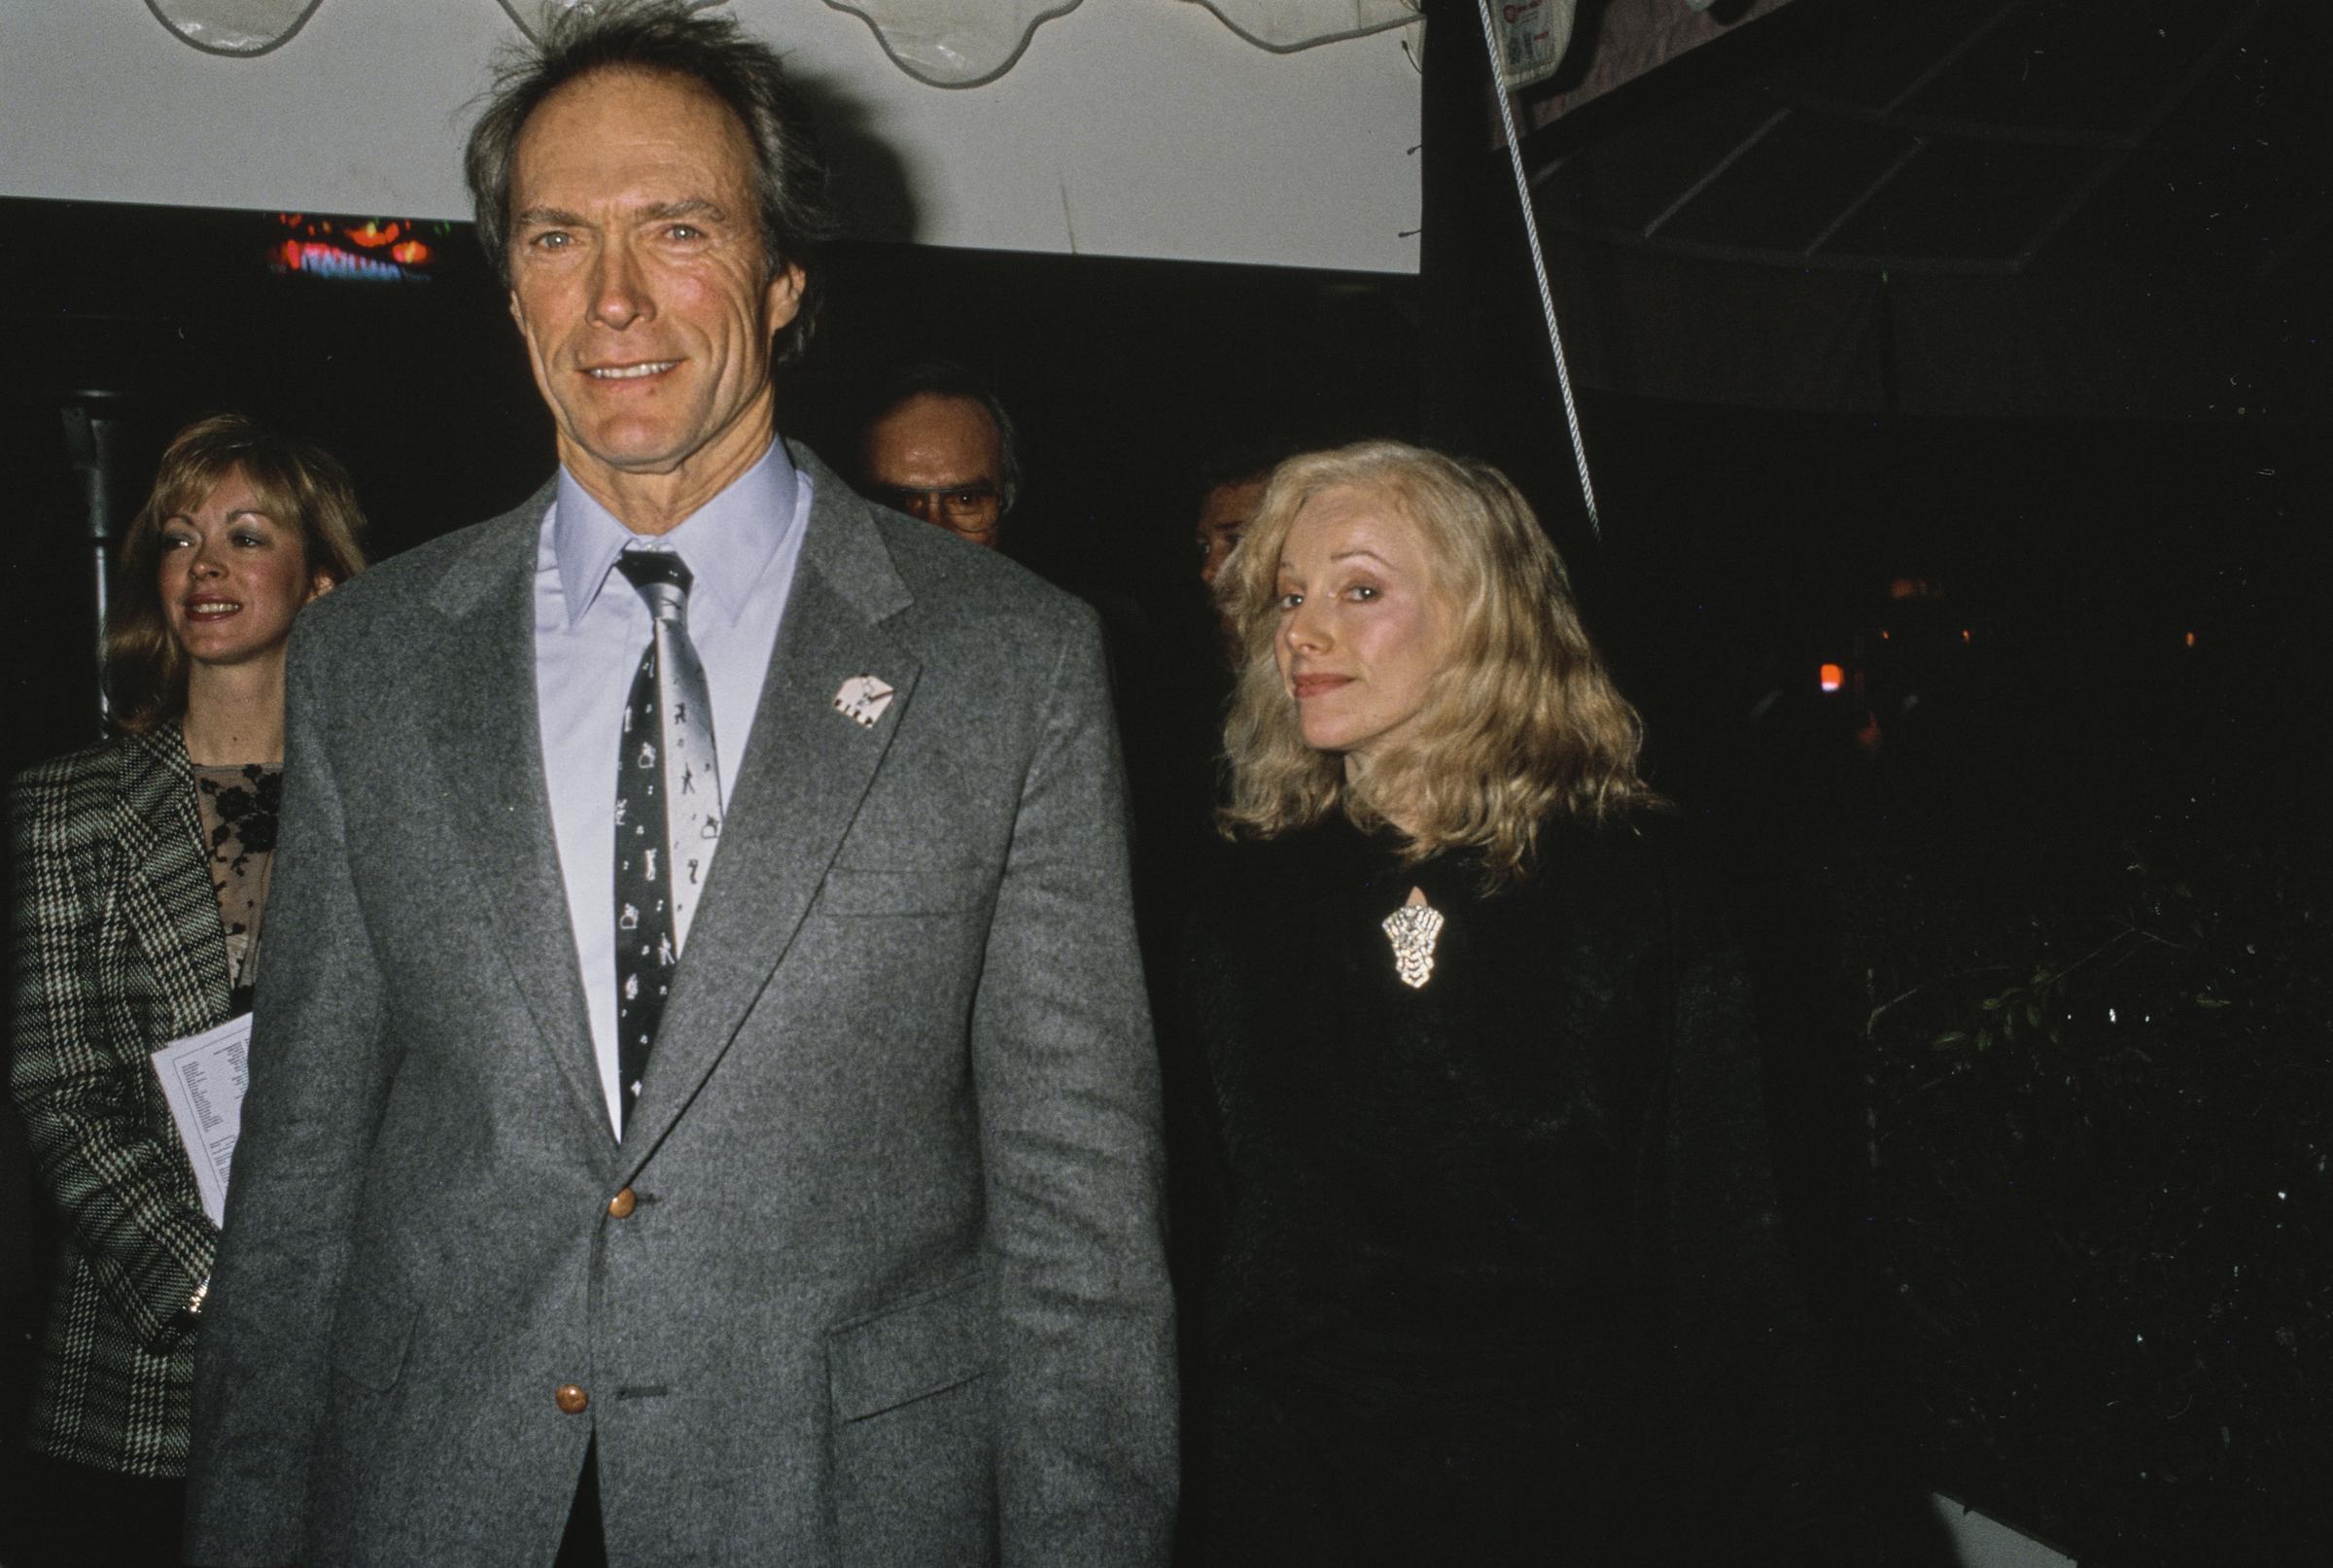 Clint Eastwood and Sondra Locke on December 8, 1988 | Source: Getty Images